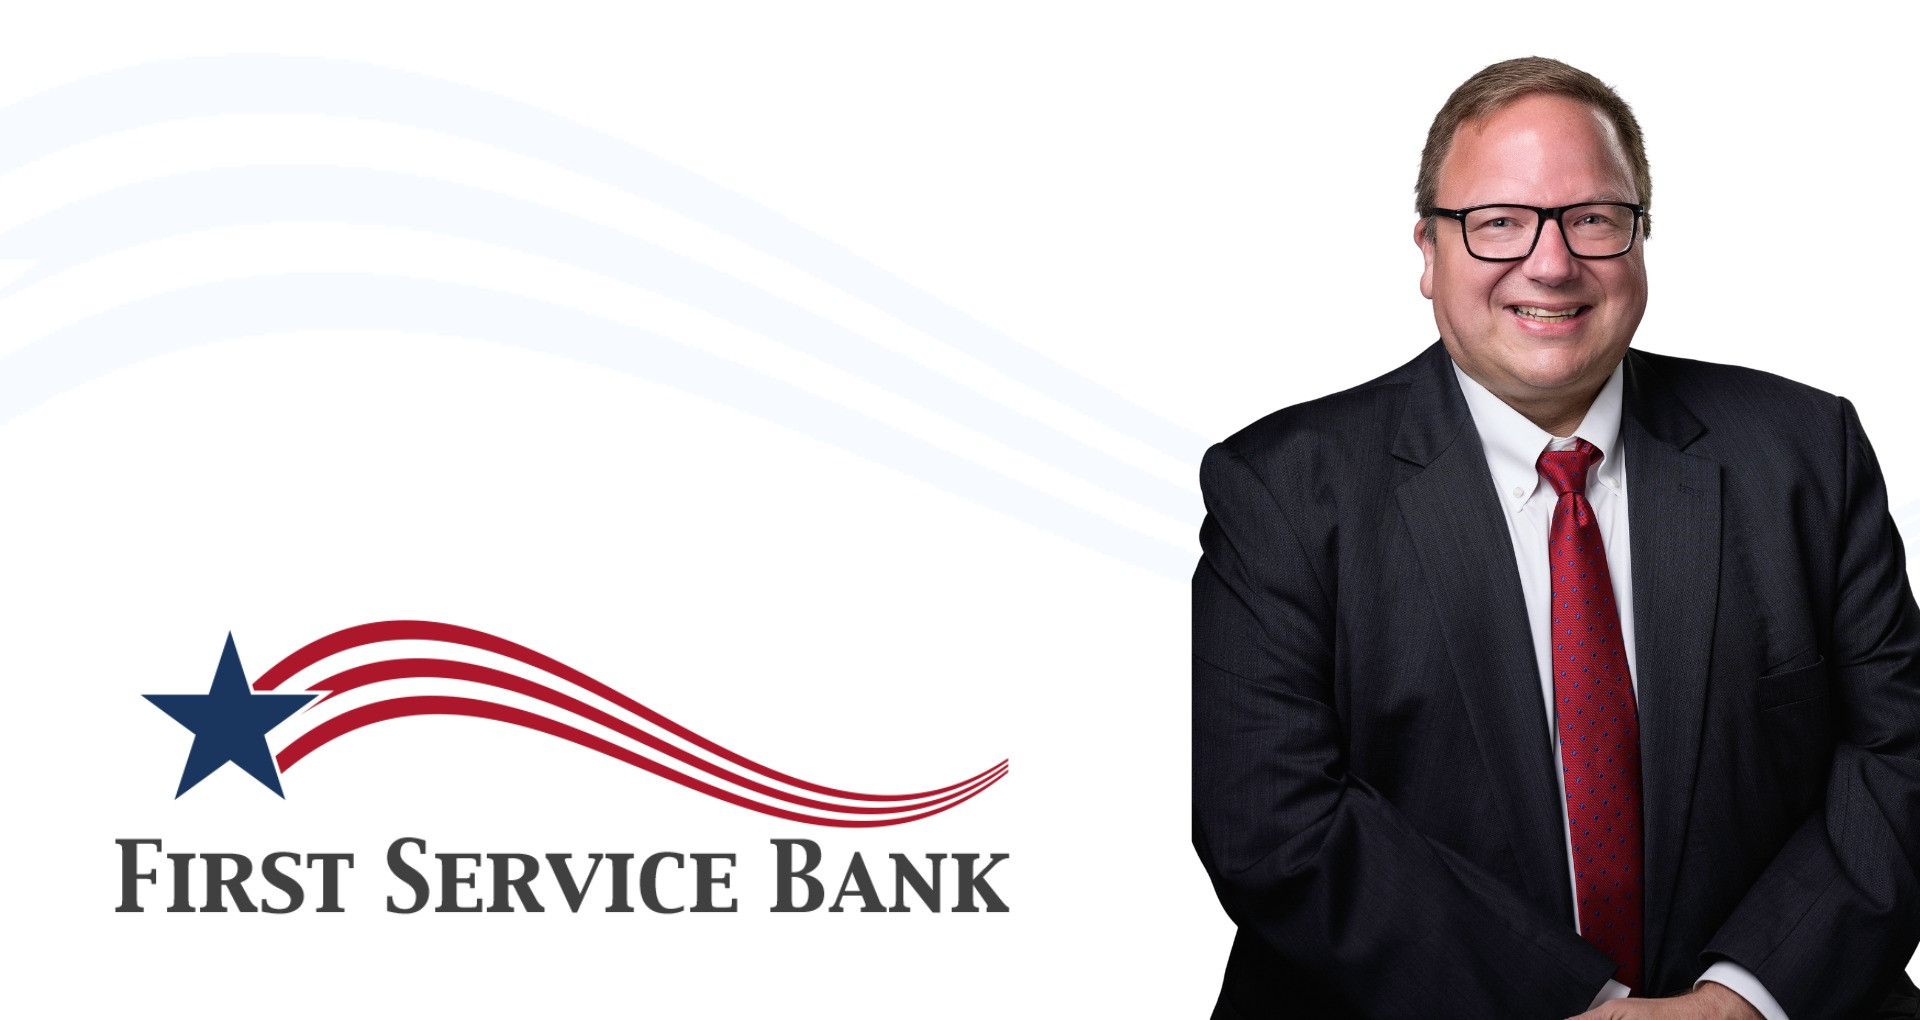 First Service Bank Appoints Philip Shell as Mortgage Department Manager and Senior Mortgage Loan Officer